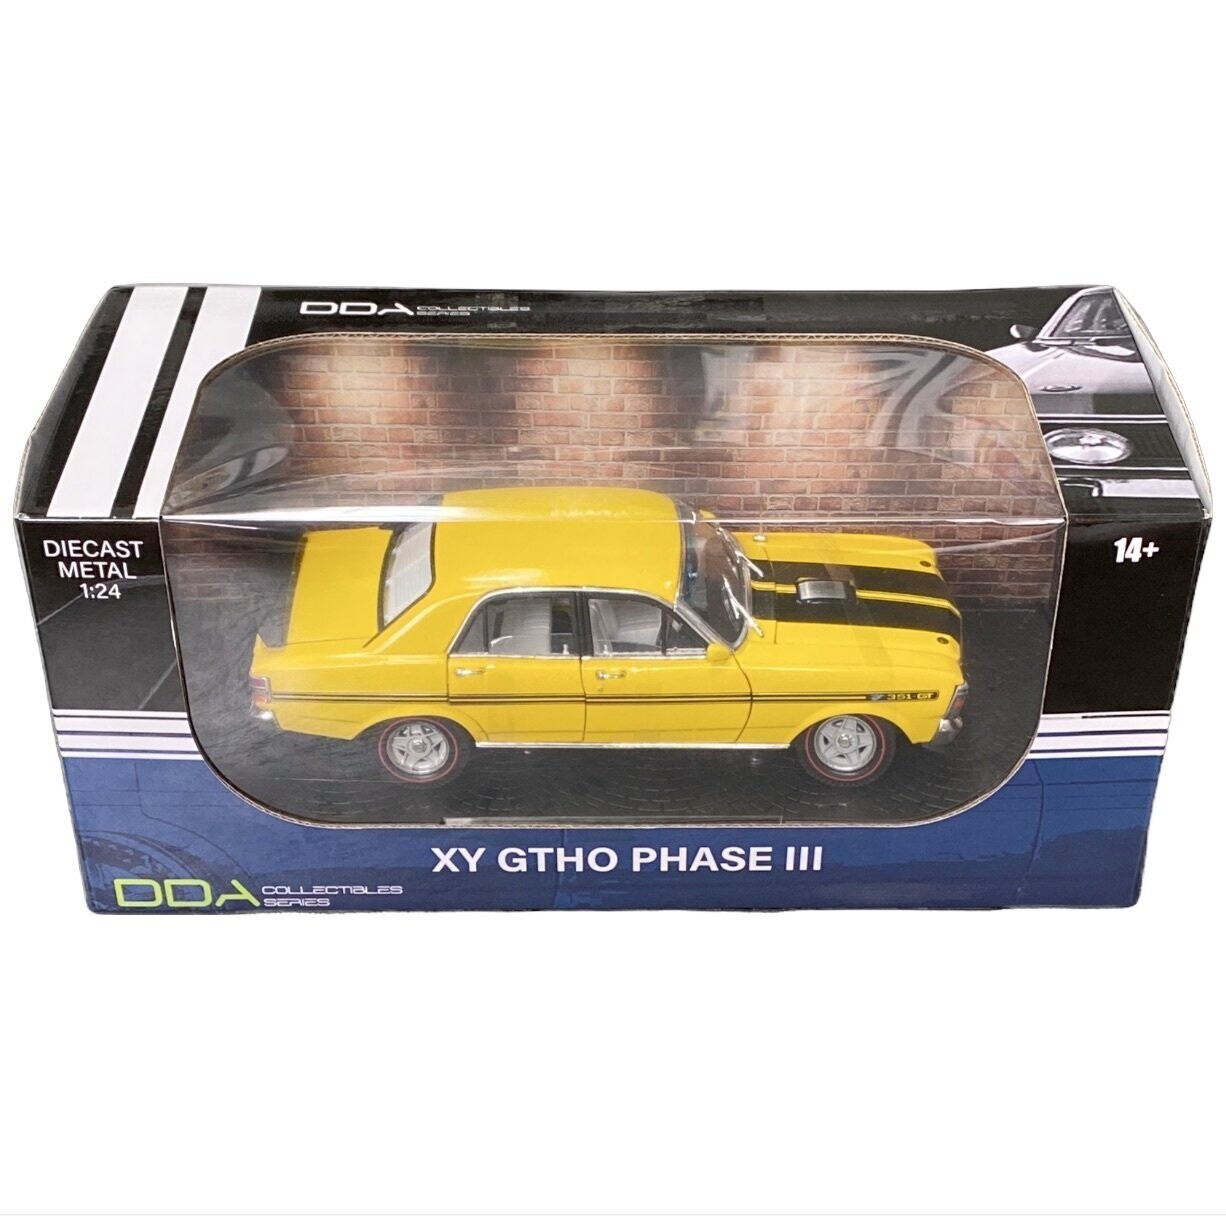 DDA Collectibles Series 1/24 Yellow Ford XY GTHO Phase III